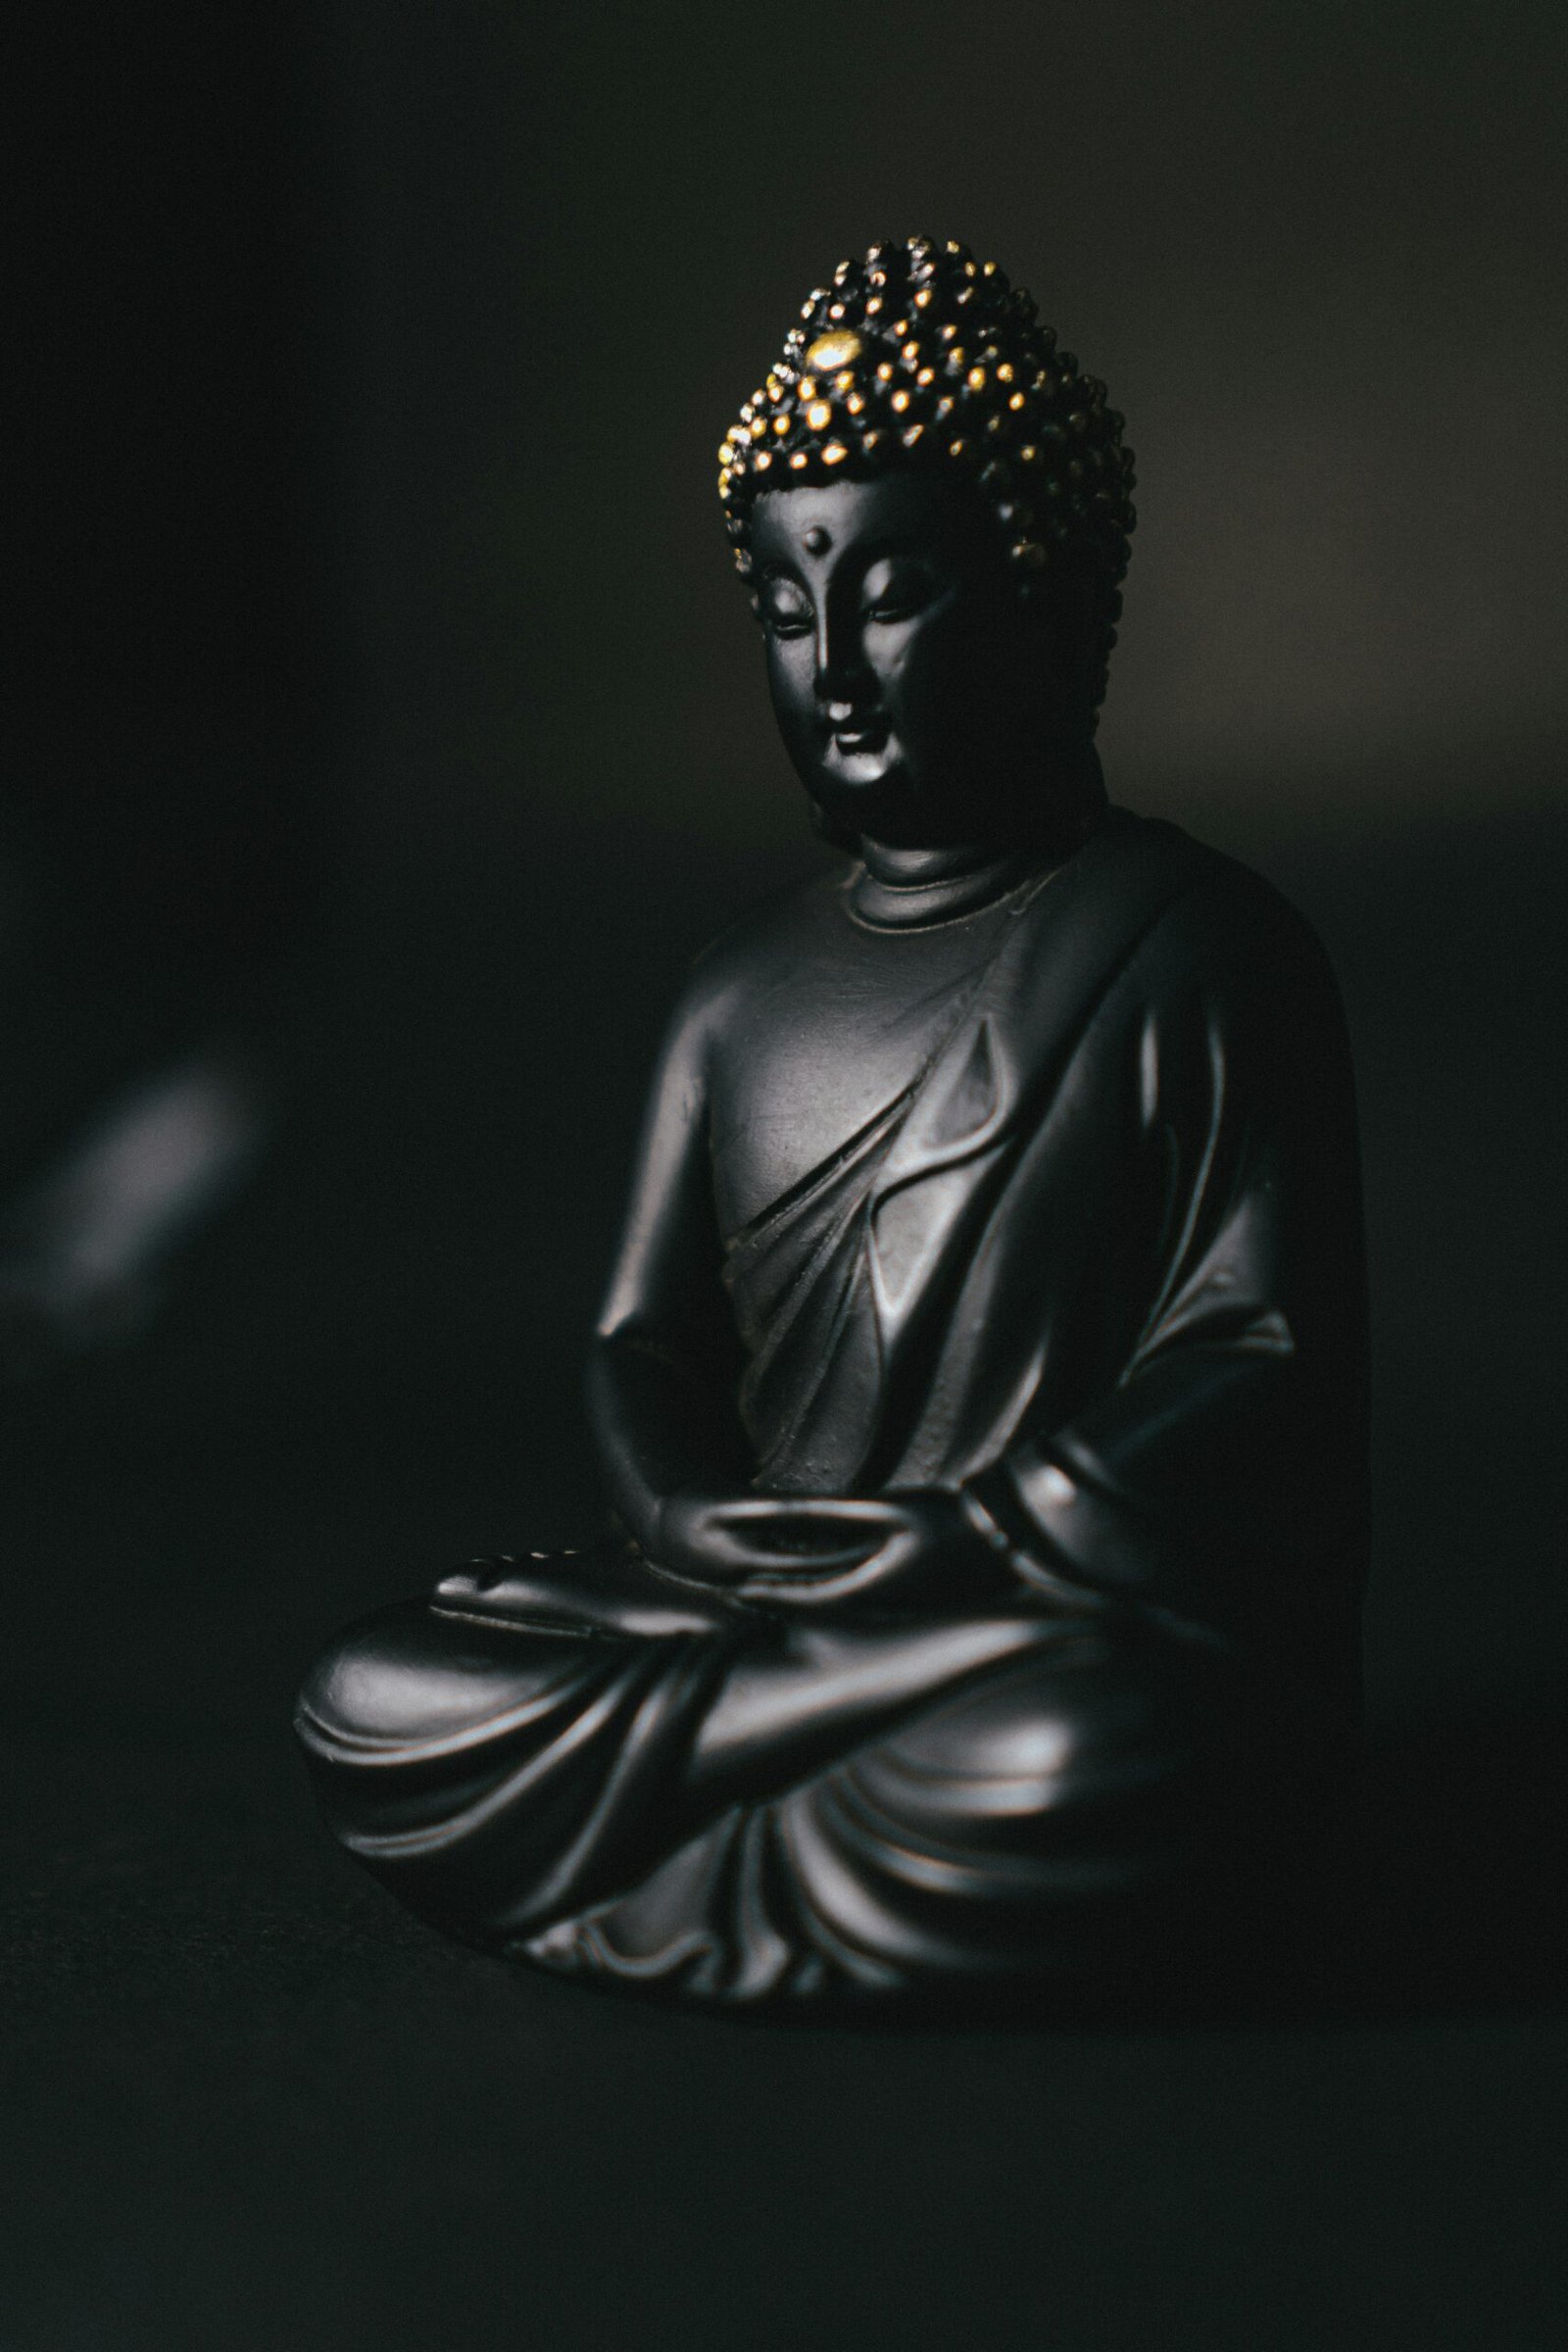 Understanding Buddhism: Buddha’s Four Noble Truths and the Theory of Impermanence